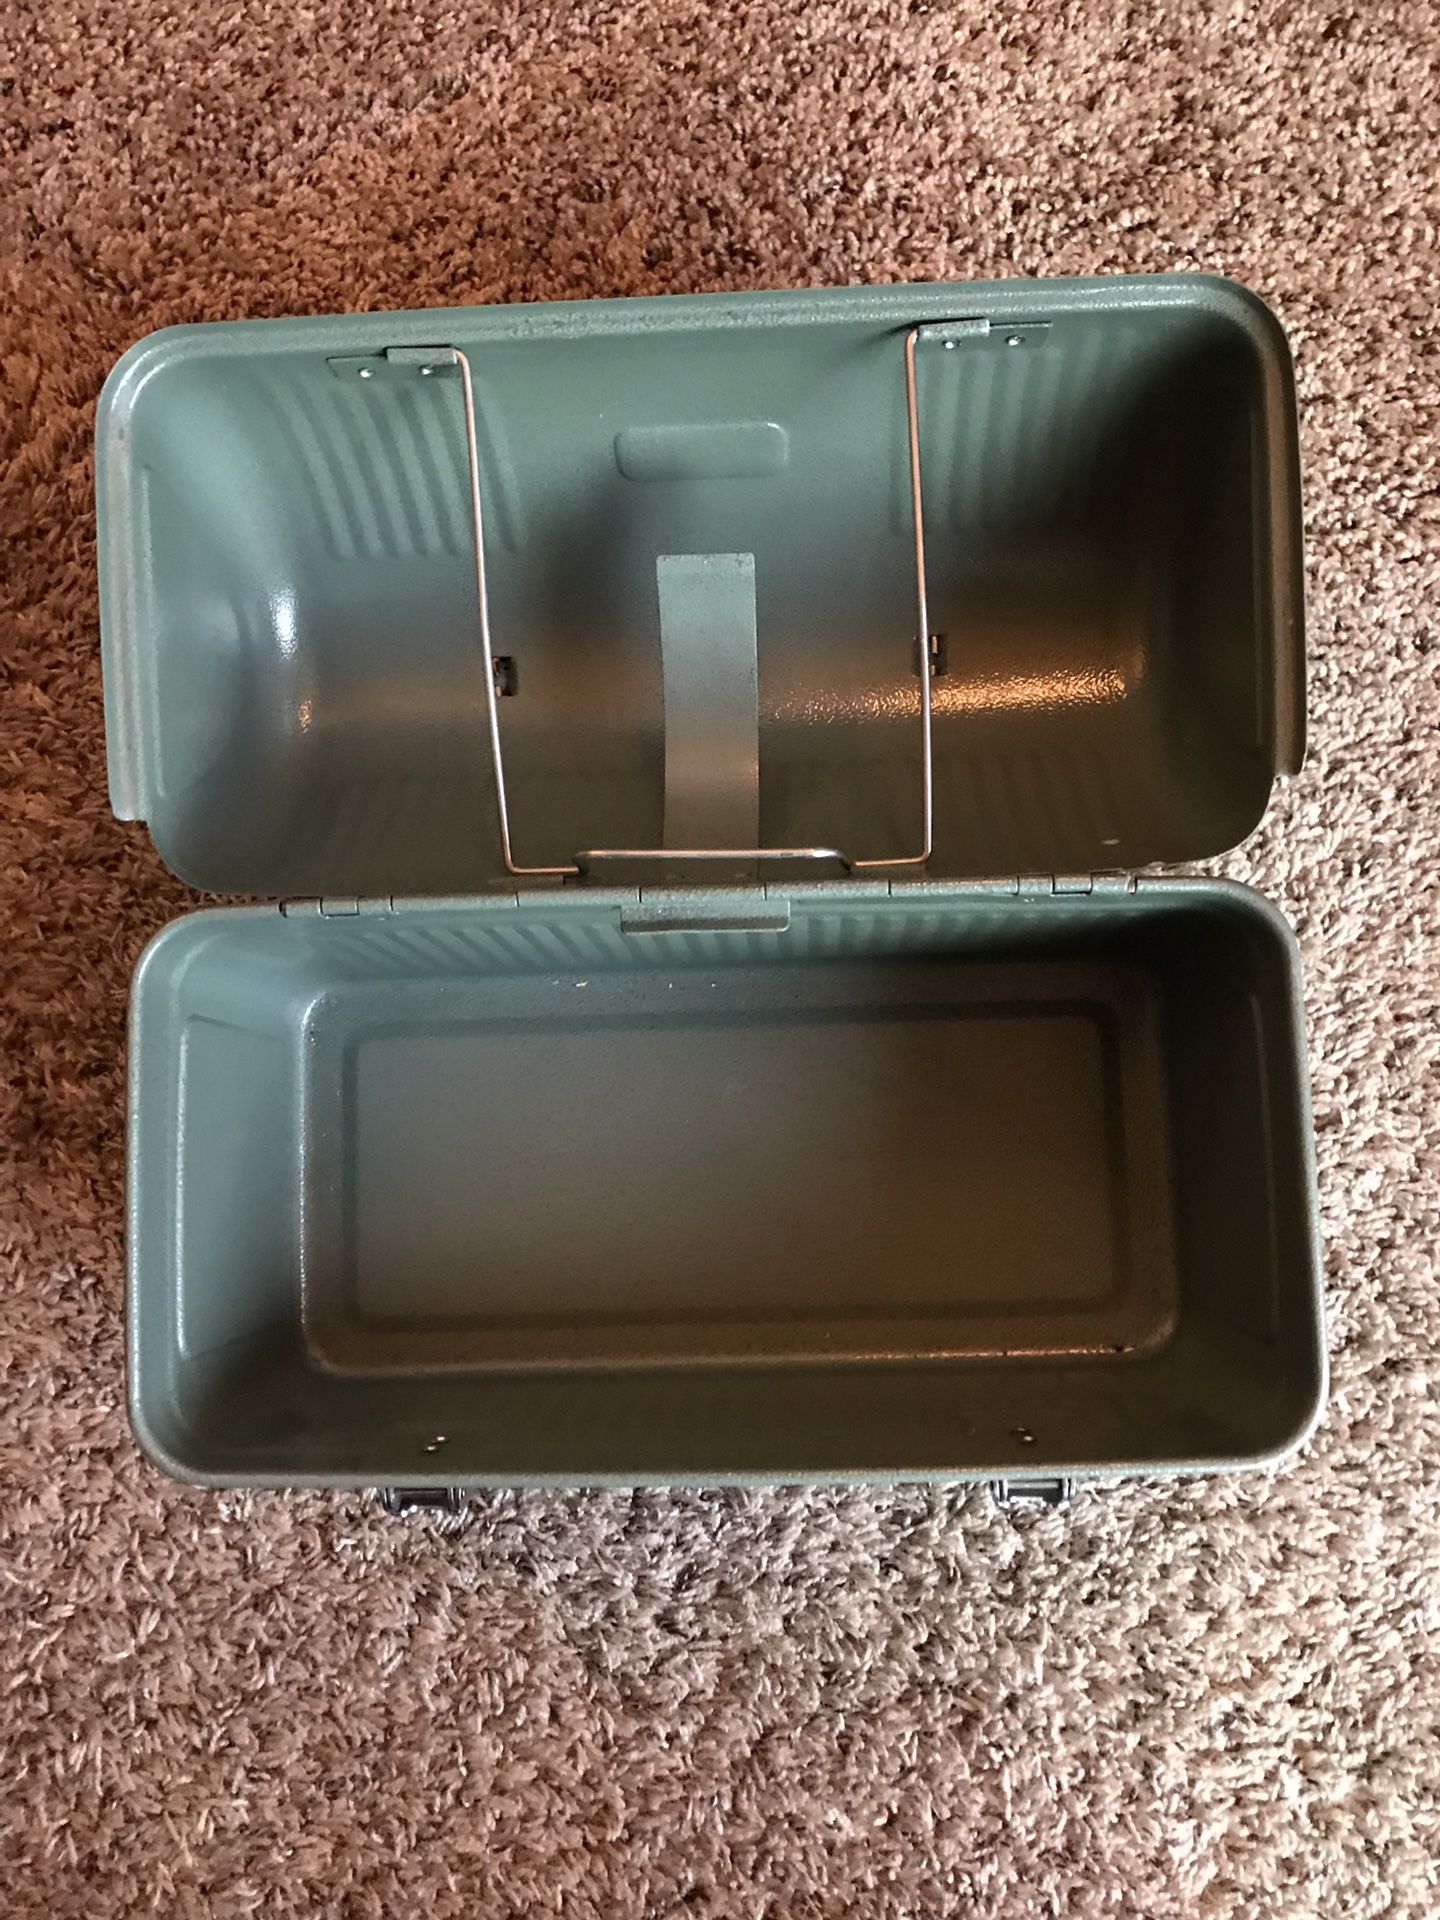 Stanley Lunch Box with Thermos - household items - by owner - housewares  sale - craigslist